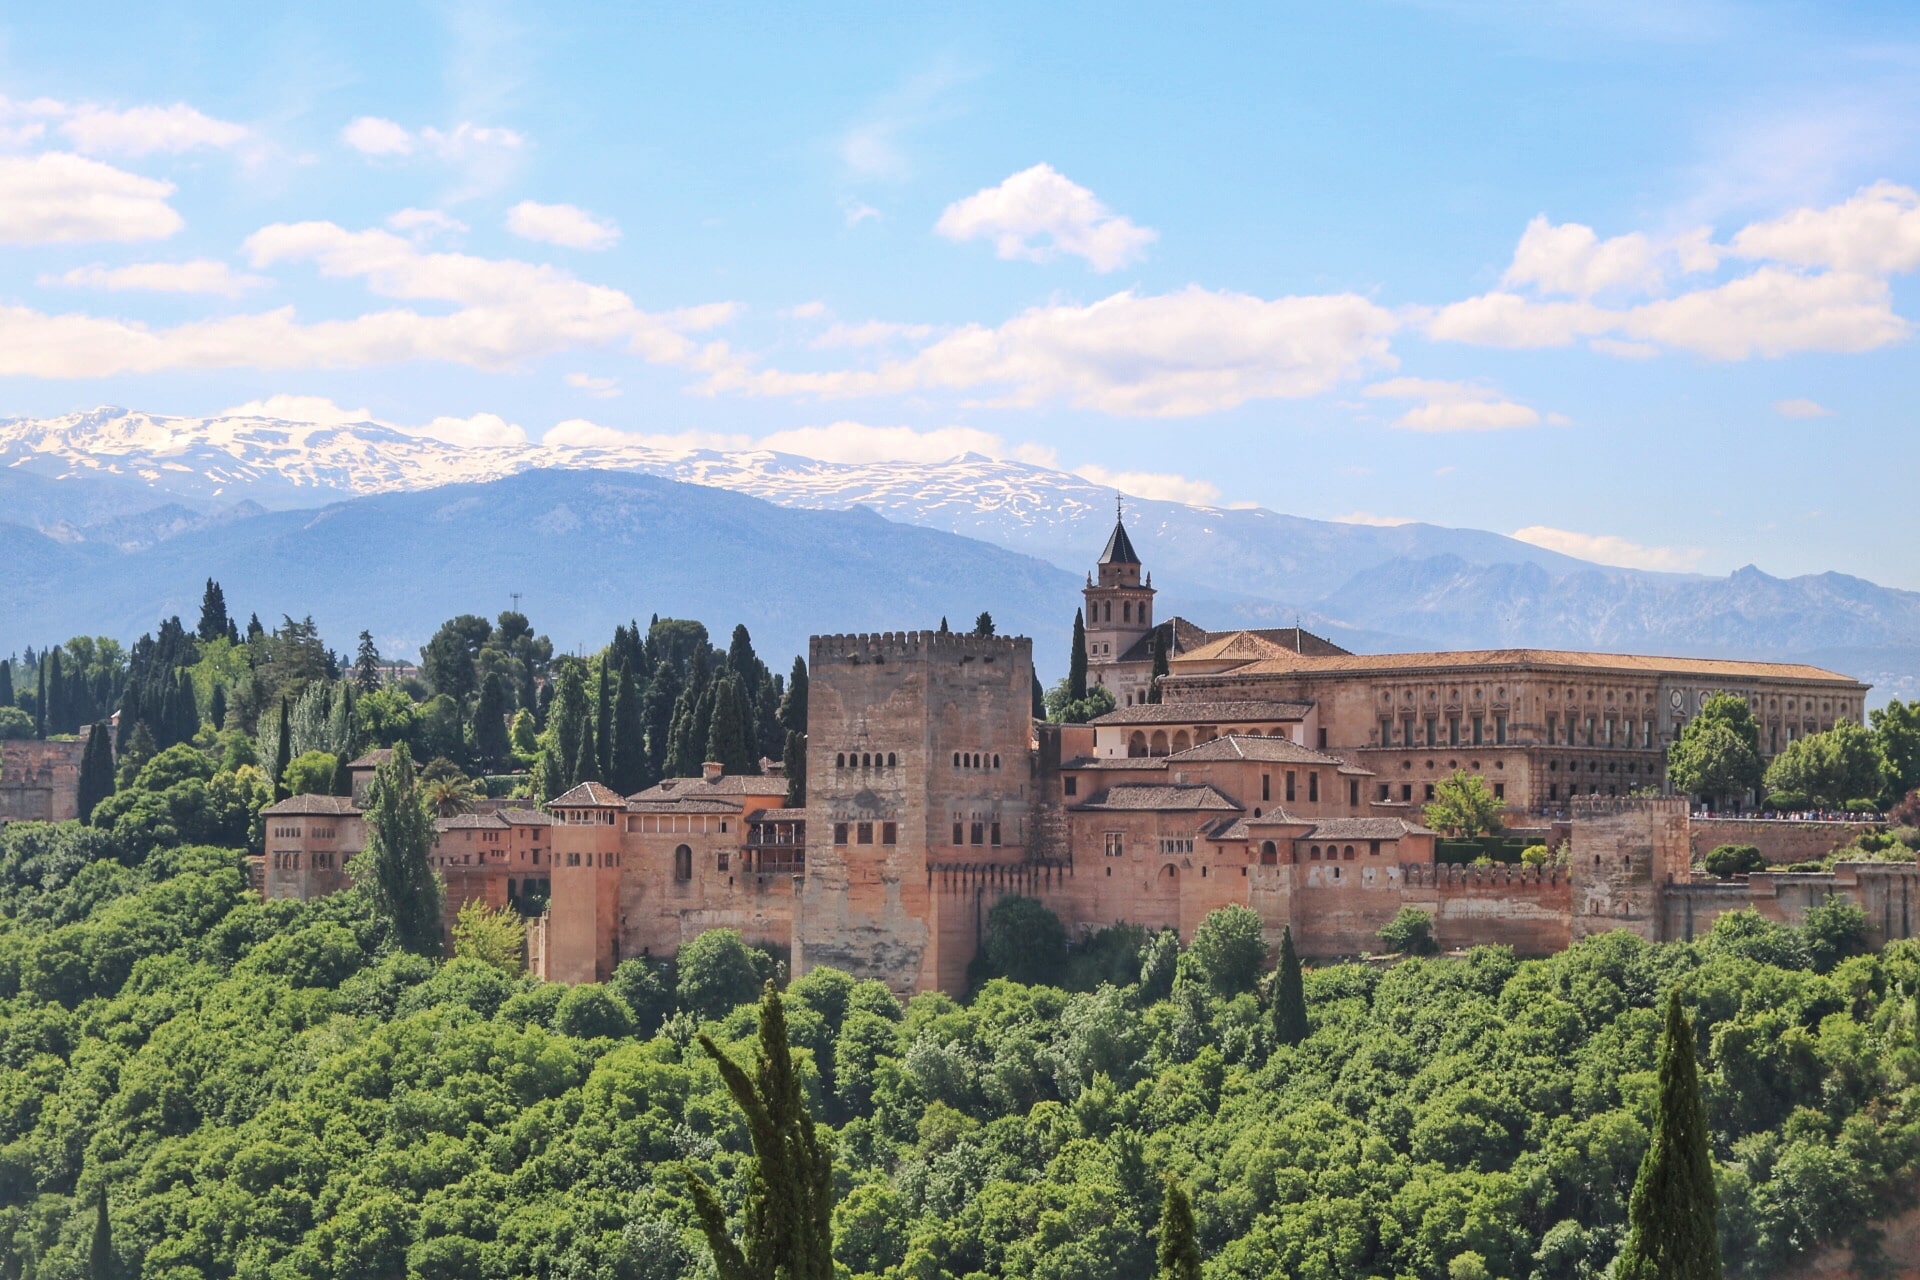 10 essential tips for visiting The Alhambra, Granada (tickets, map, itinerary)